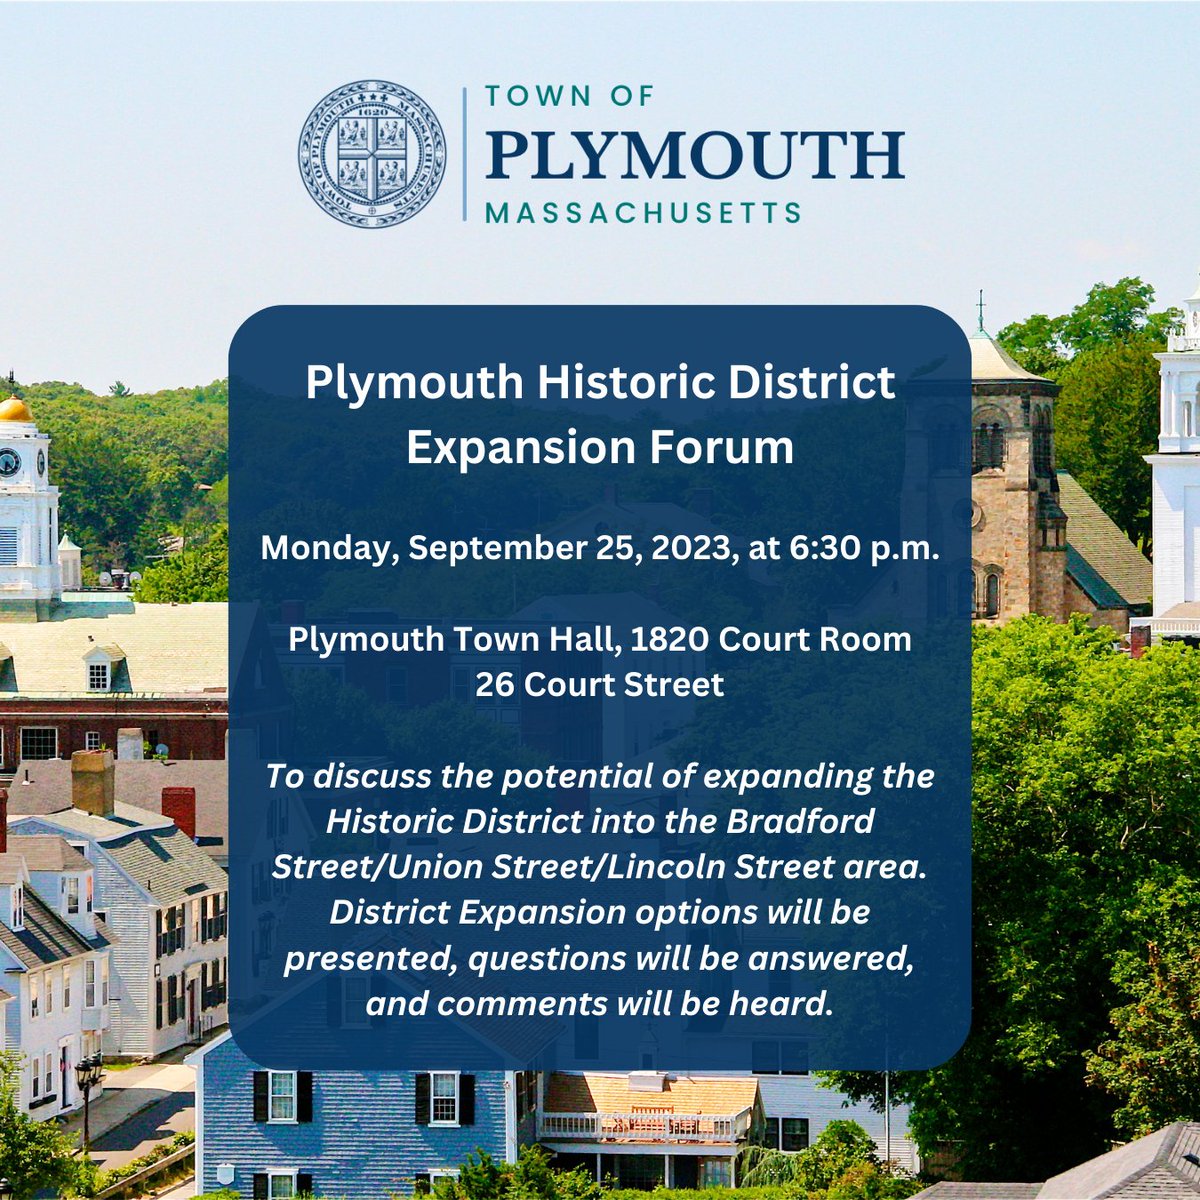 The Plymouth Historic District Commission will hold a public forum on September 25, 2023, at 6:30 p.m. to discuss the potential of expanding the Historic District into the Bradford Street/Union Street/Lincoln Street area. More details here: plymouth-ma.gov/739/Historic-D…